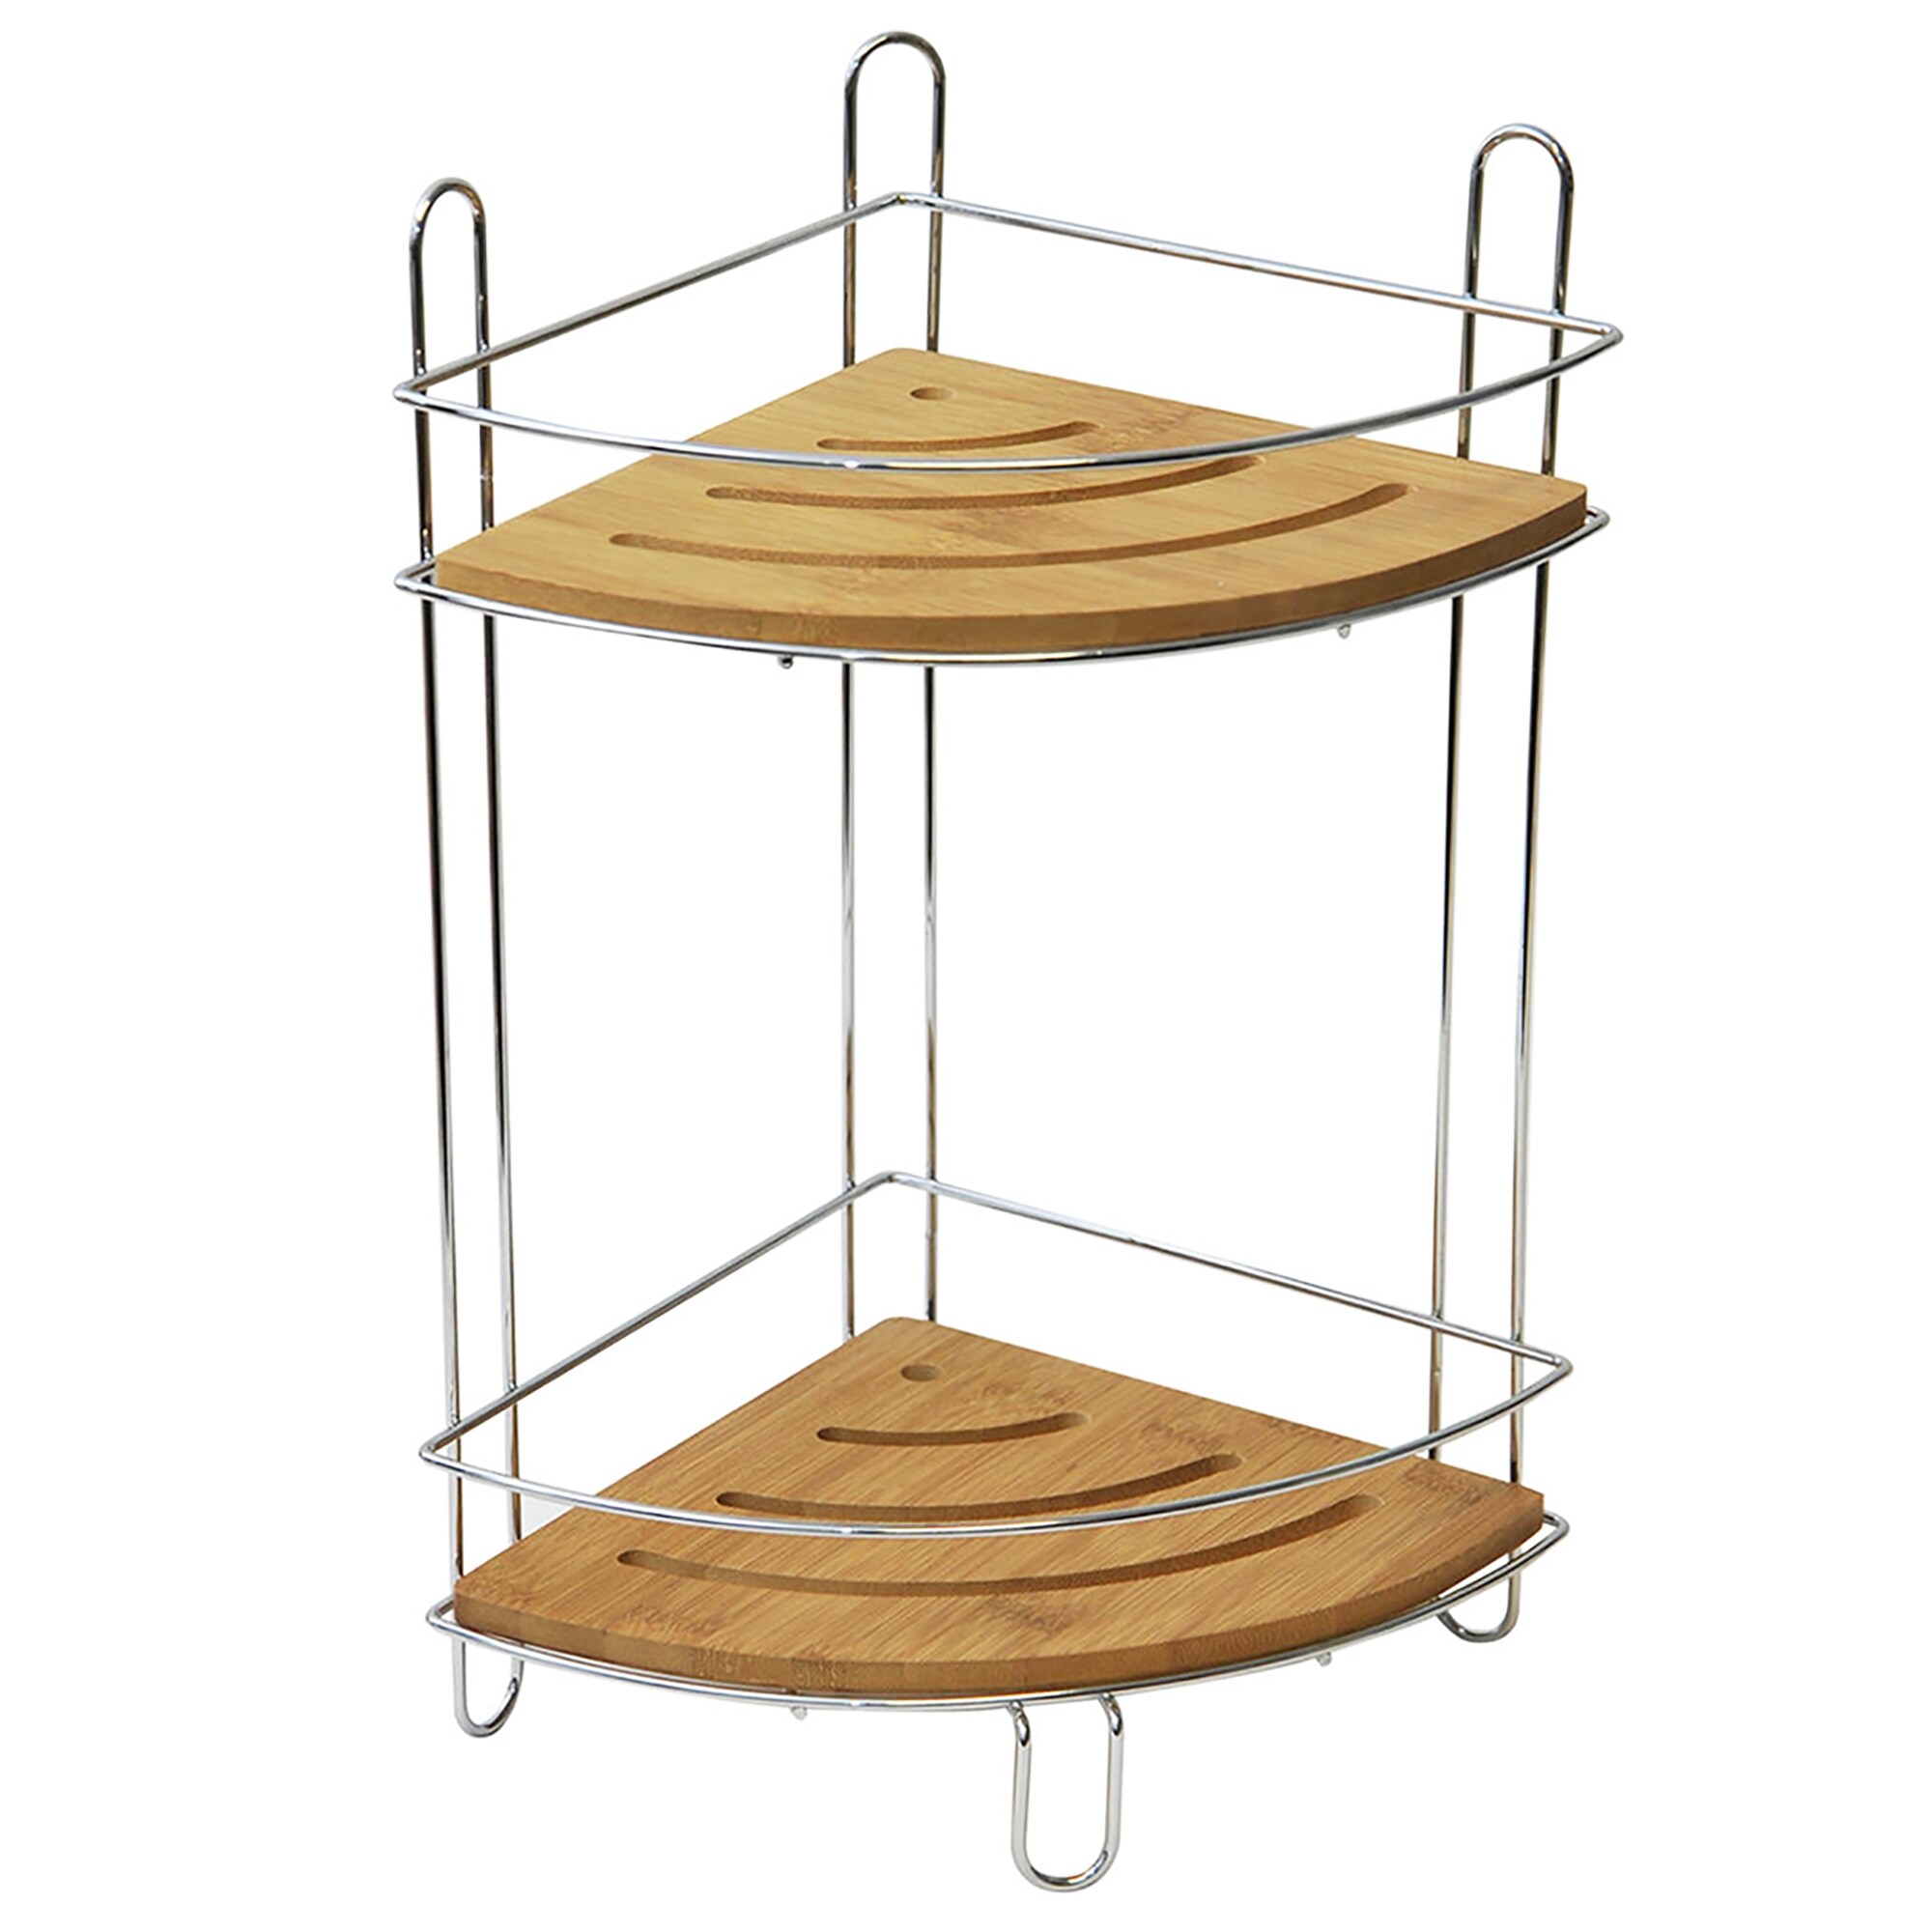 https://ak1.ostkcdn.com/images/products/is/images/direct/48d9a0f5545cd35f220278ad9b02a4d2c90d5c0e/Organizer-Metal-Wire-Corner-Shower-Caddy-Bamboo.jpg